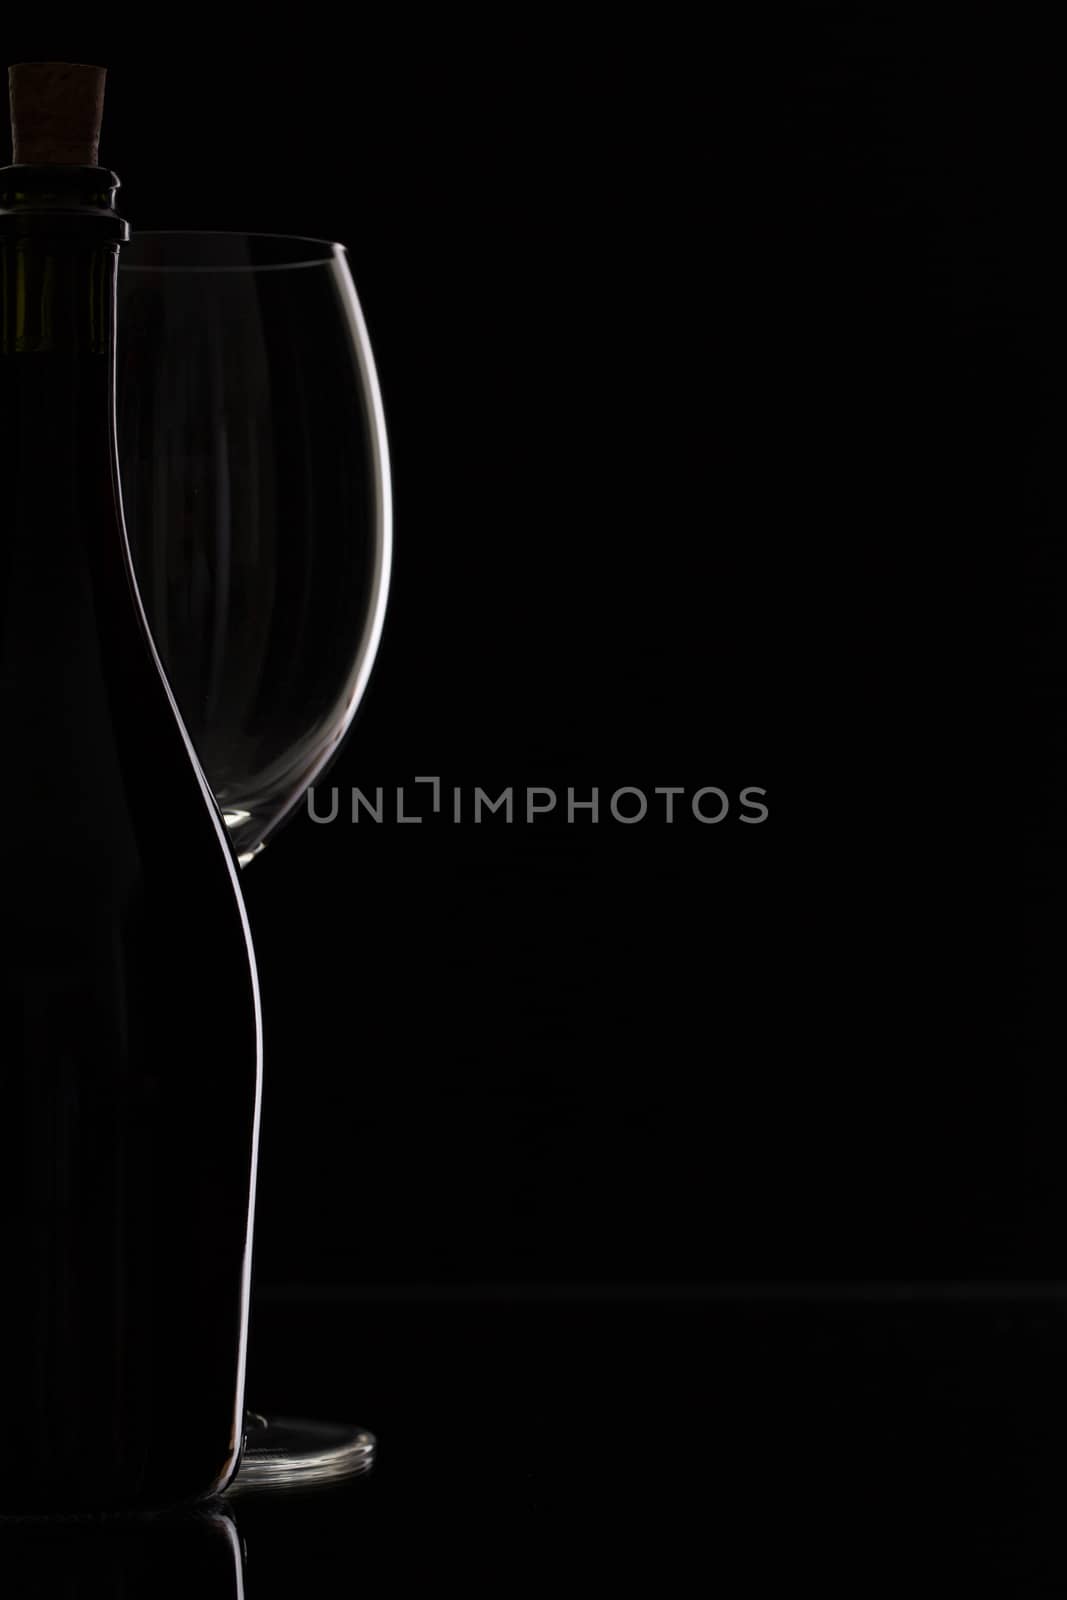 Silhouette bottle and glass on the black background